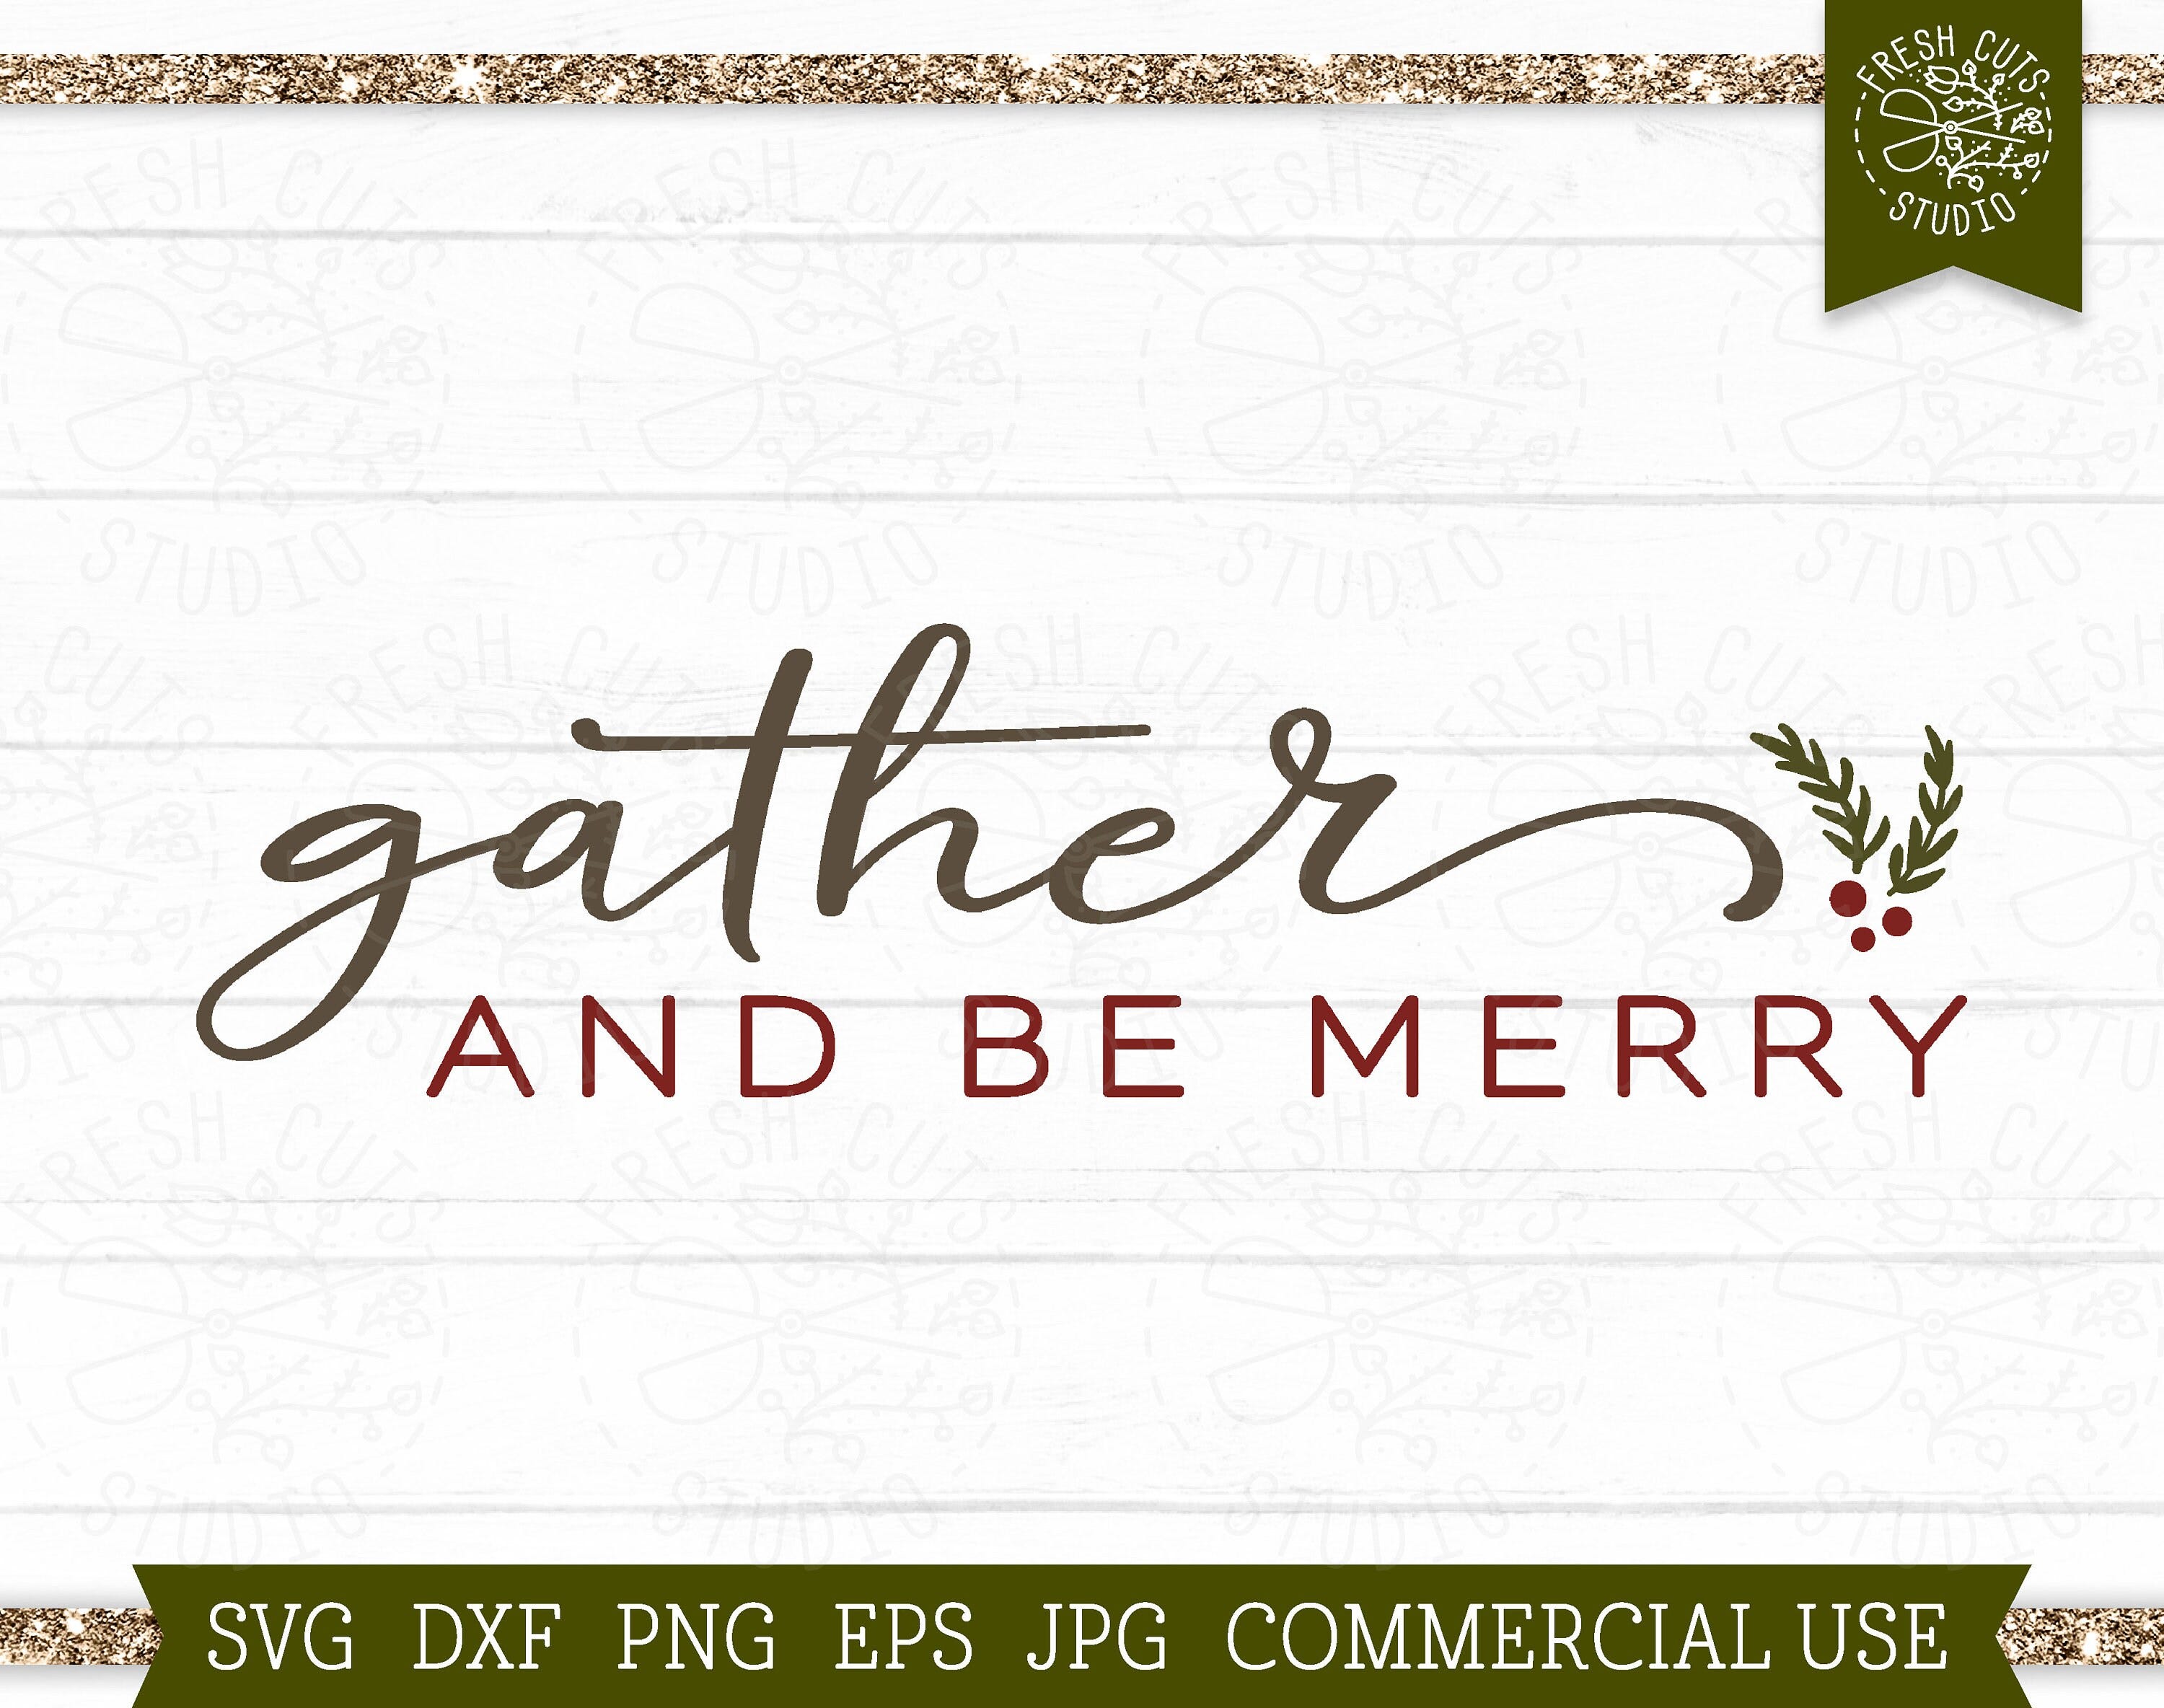 Gather and Be Merry SVG Family Farmhouse Saying, Cut file for Cricut, Faith svg, Rustic Christmas, Blessed, Kitchen Decor, Merry Christmas